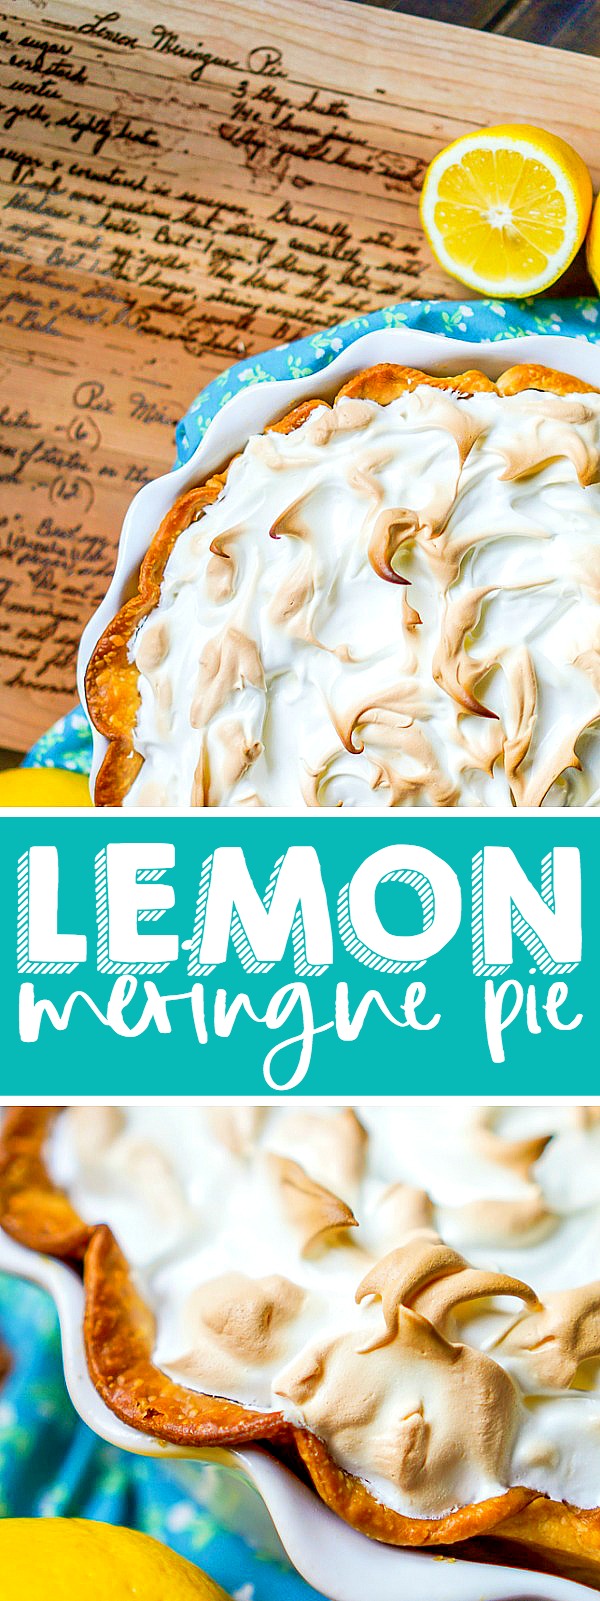 Mom's Lemon Meringue Pie - A classic family dessert recipe that we all love and so will you! This lemon pie recipe topped with stiff, fluffy meringue is the perfect holiday dessert! | THE LOVE NERDS #christmasdessert #holidaydessert #pierecipe #meringuerecipe 